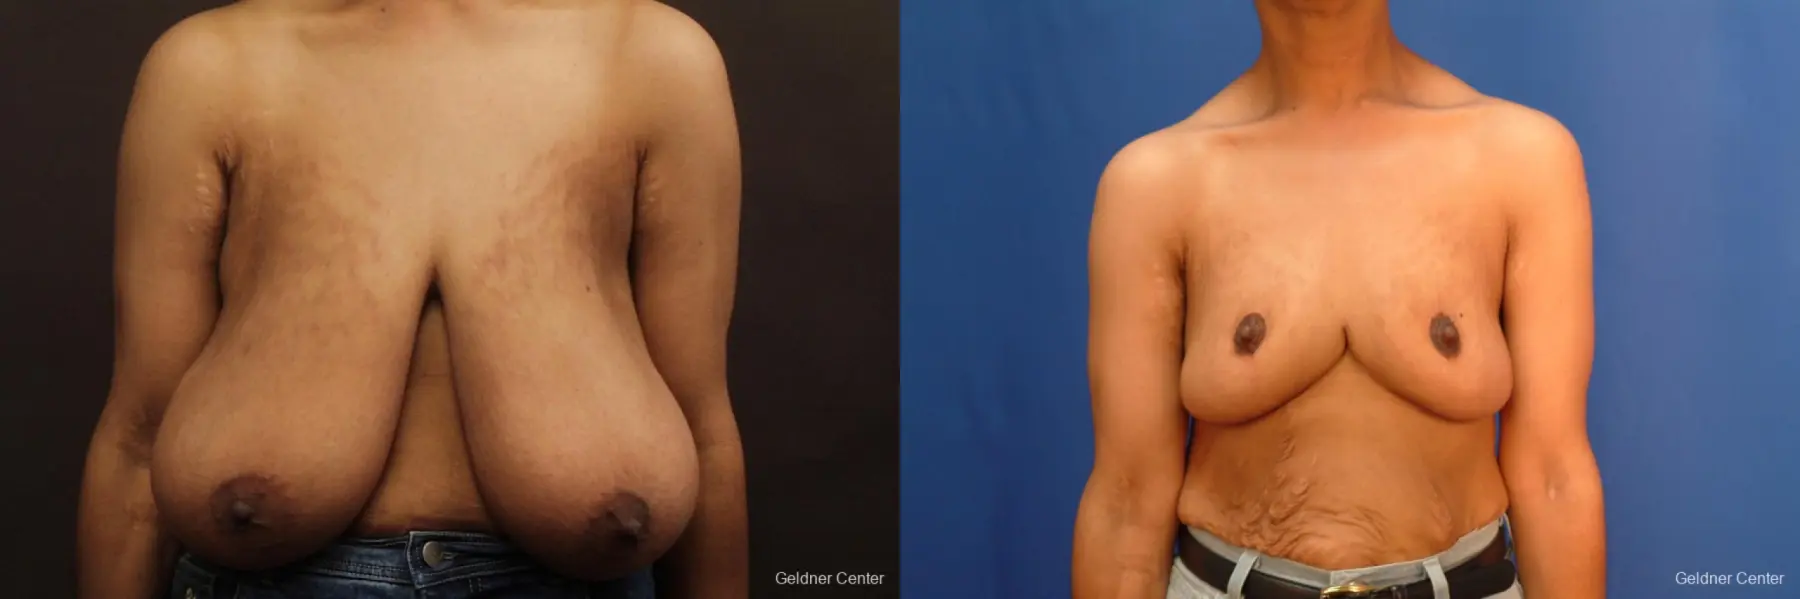 Breast Reduction Hinsdale 2440 - Before and After 1